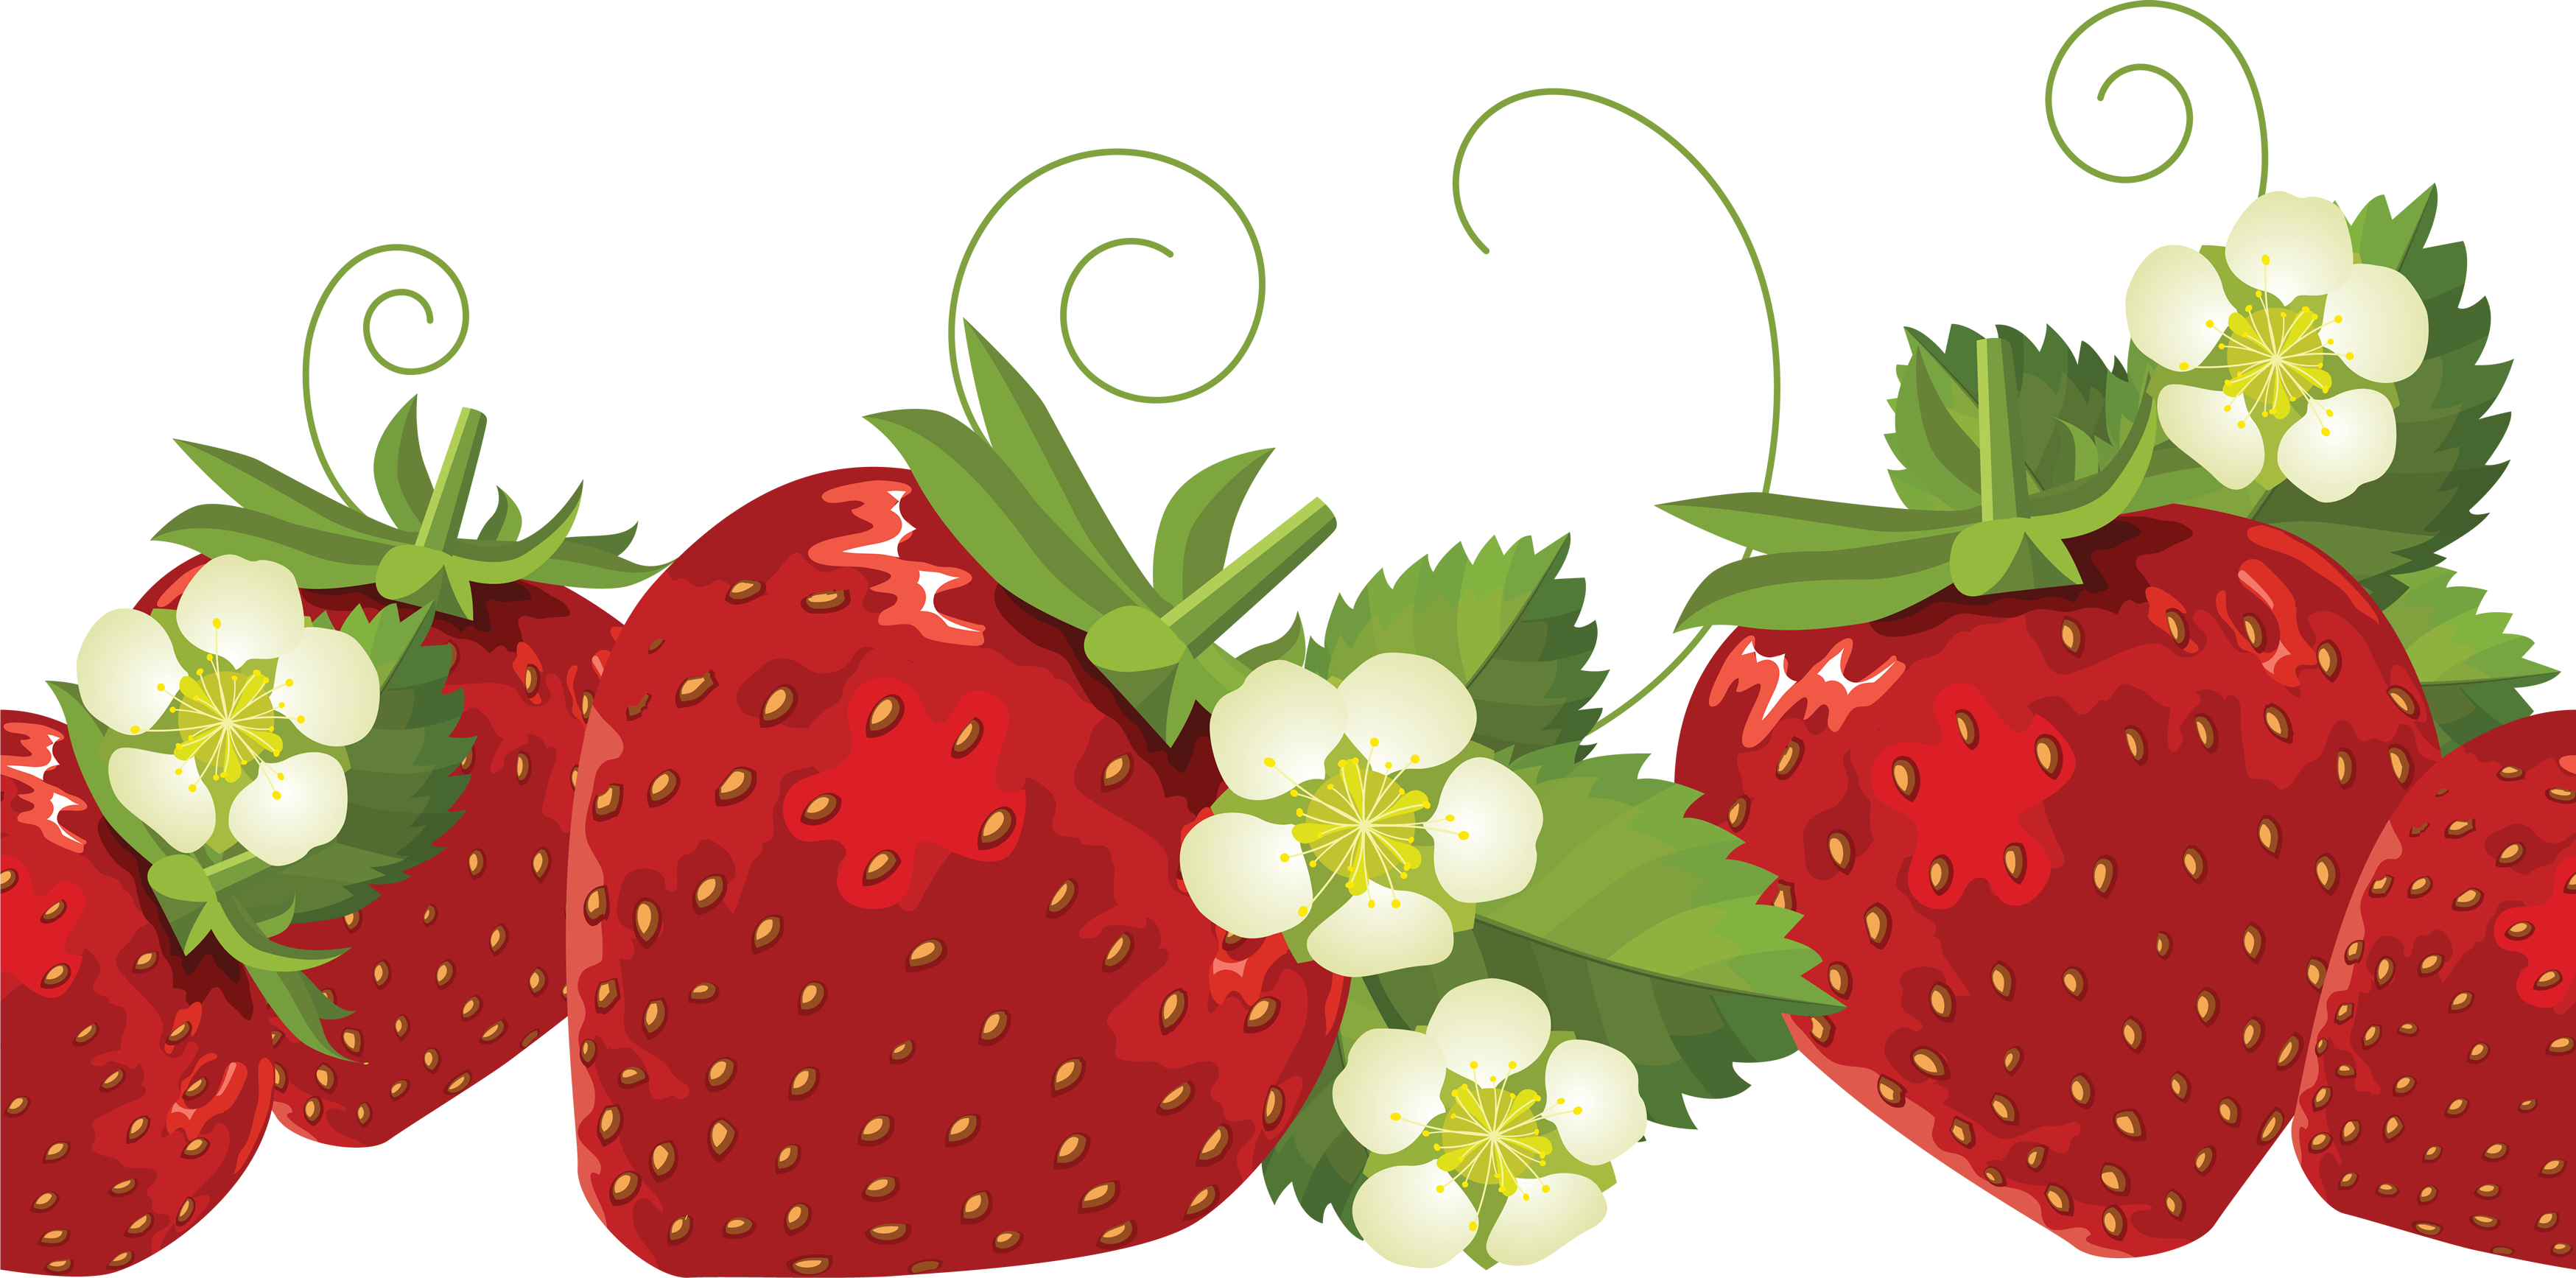 foods clipart strawberry